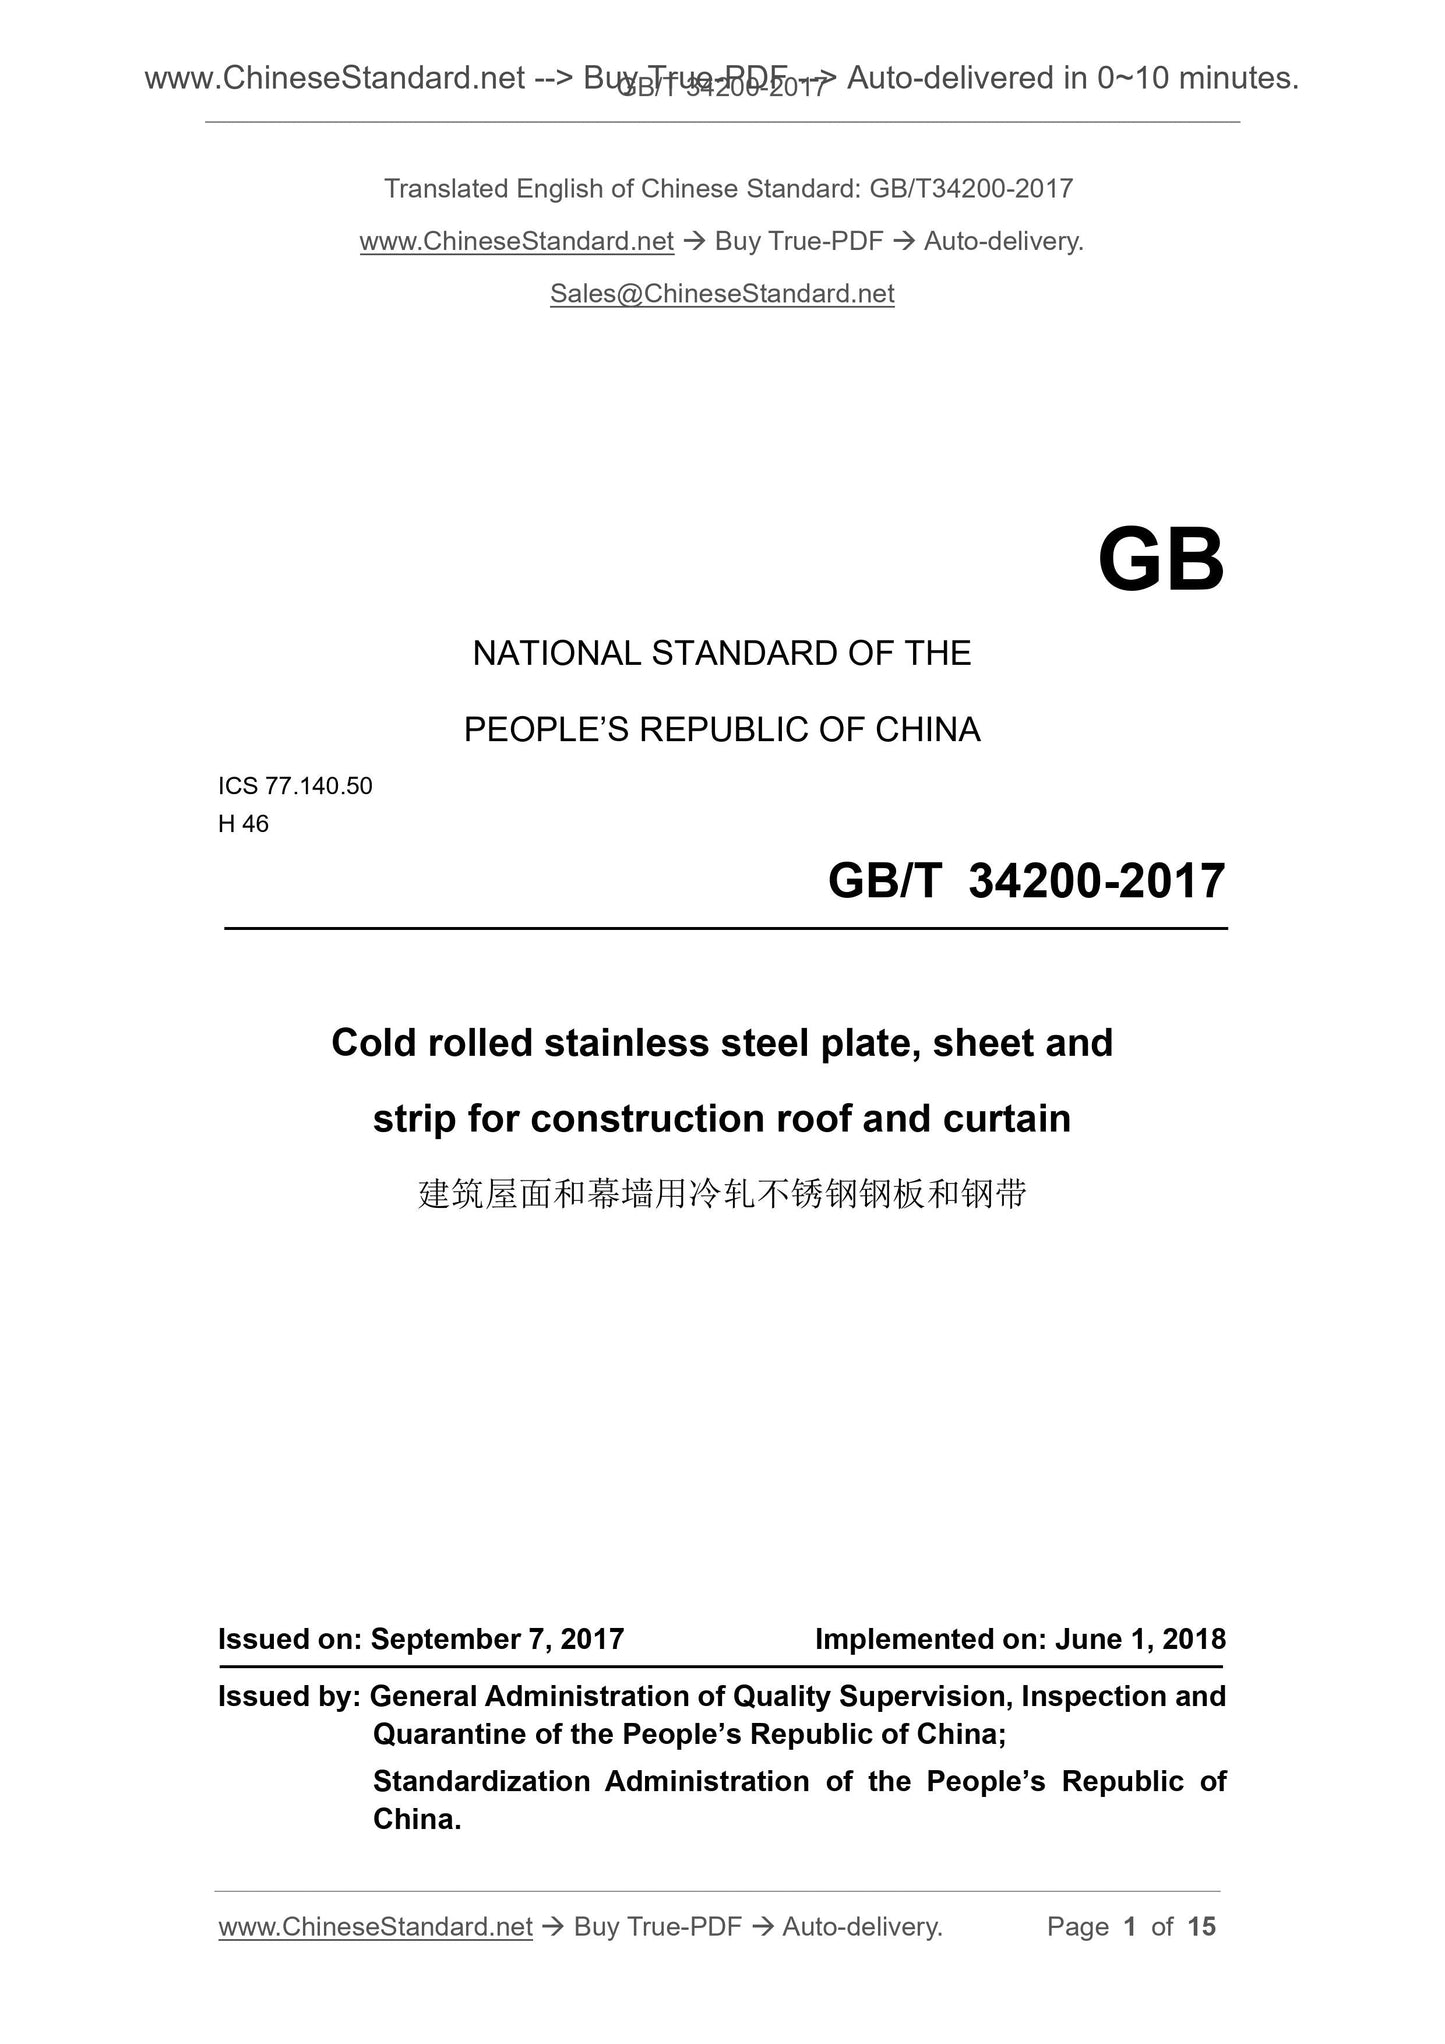 GB/T 34200-2017 Page 1